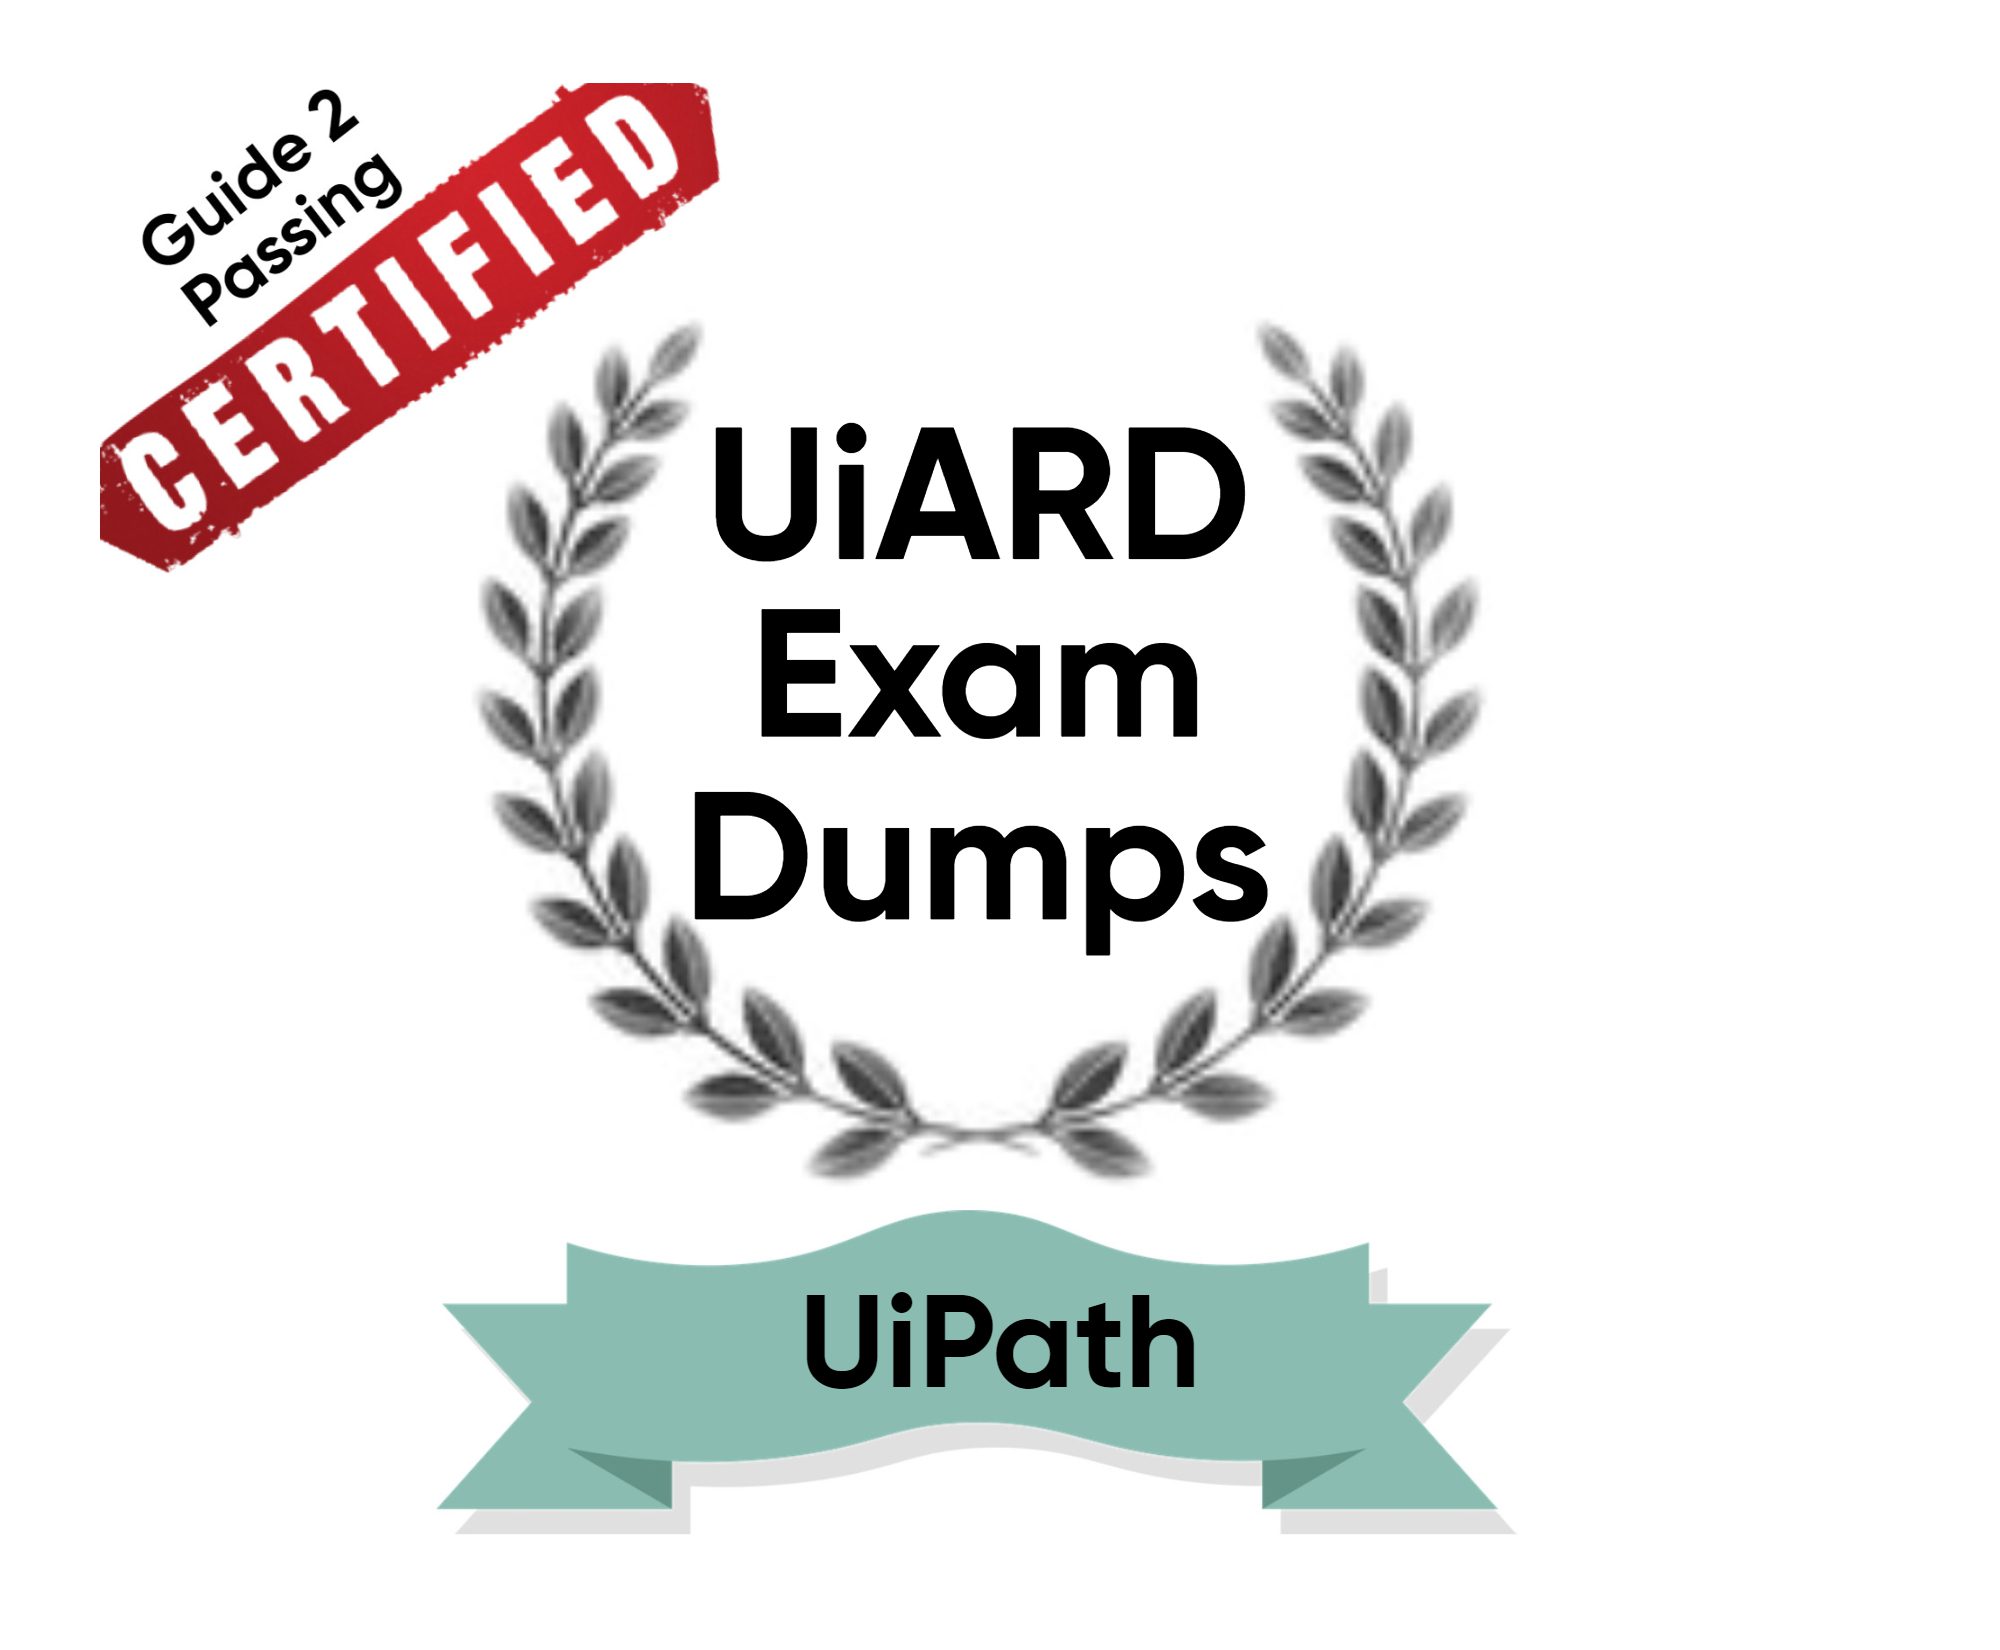 Pass Your UiPath UiARD Exam Dumps in First Attempt From Guide 2 Passing